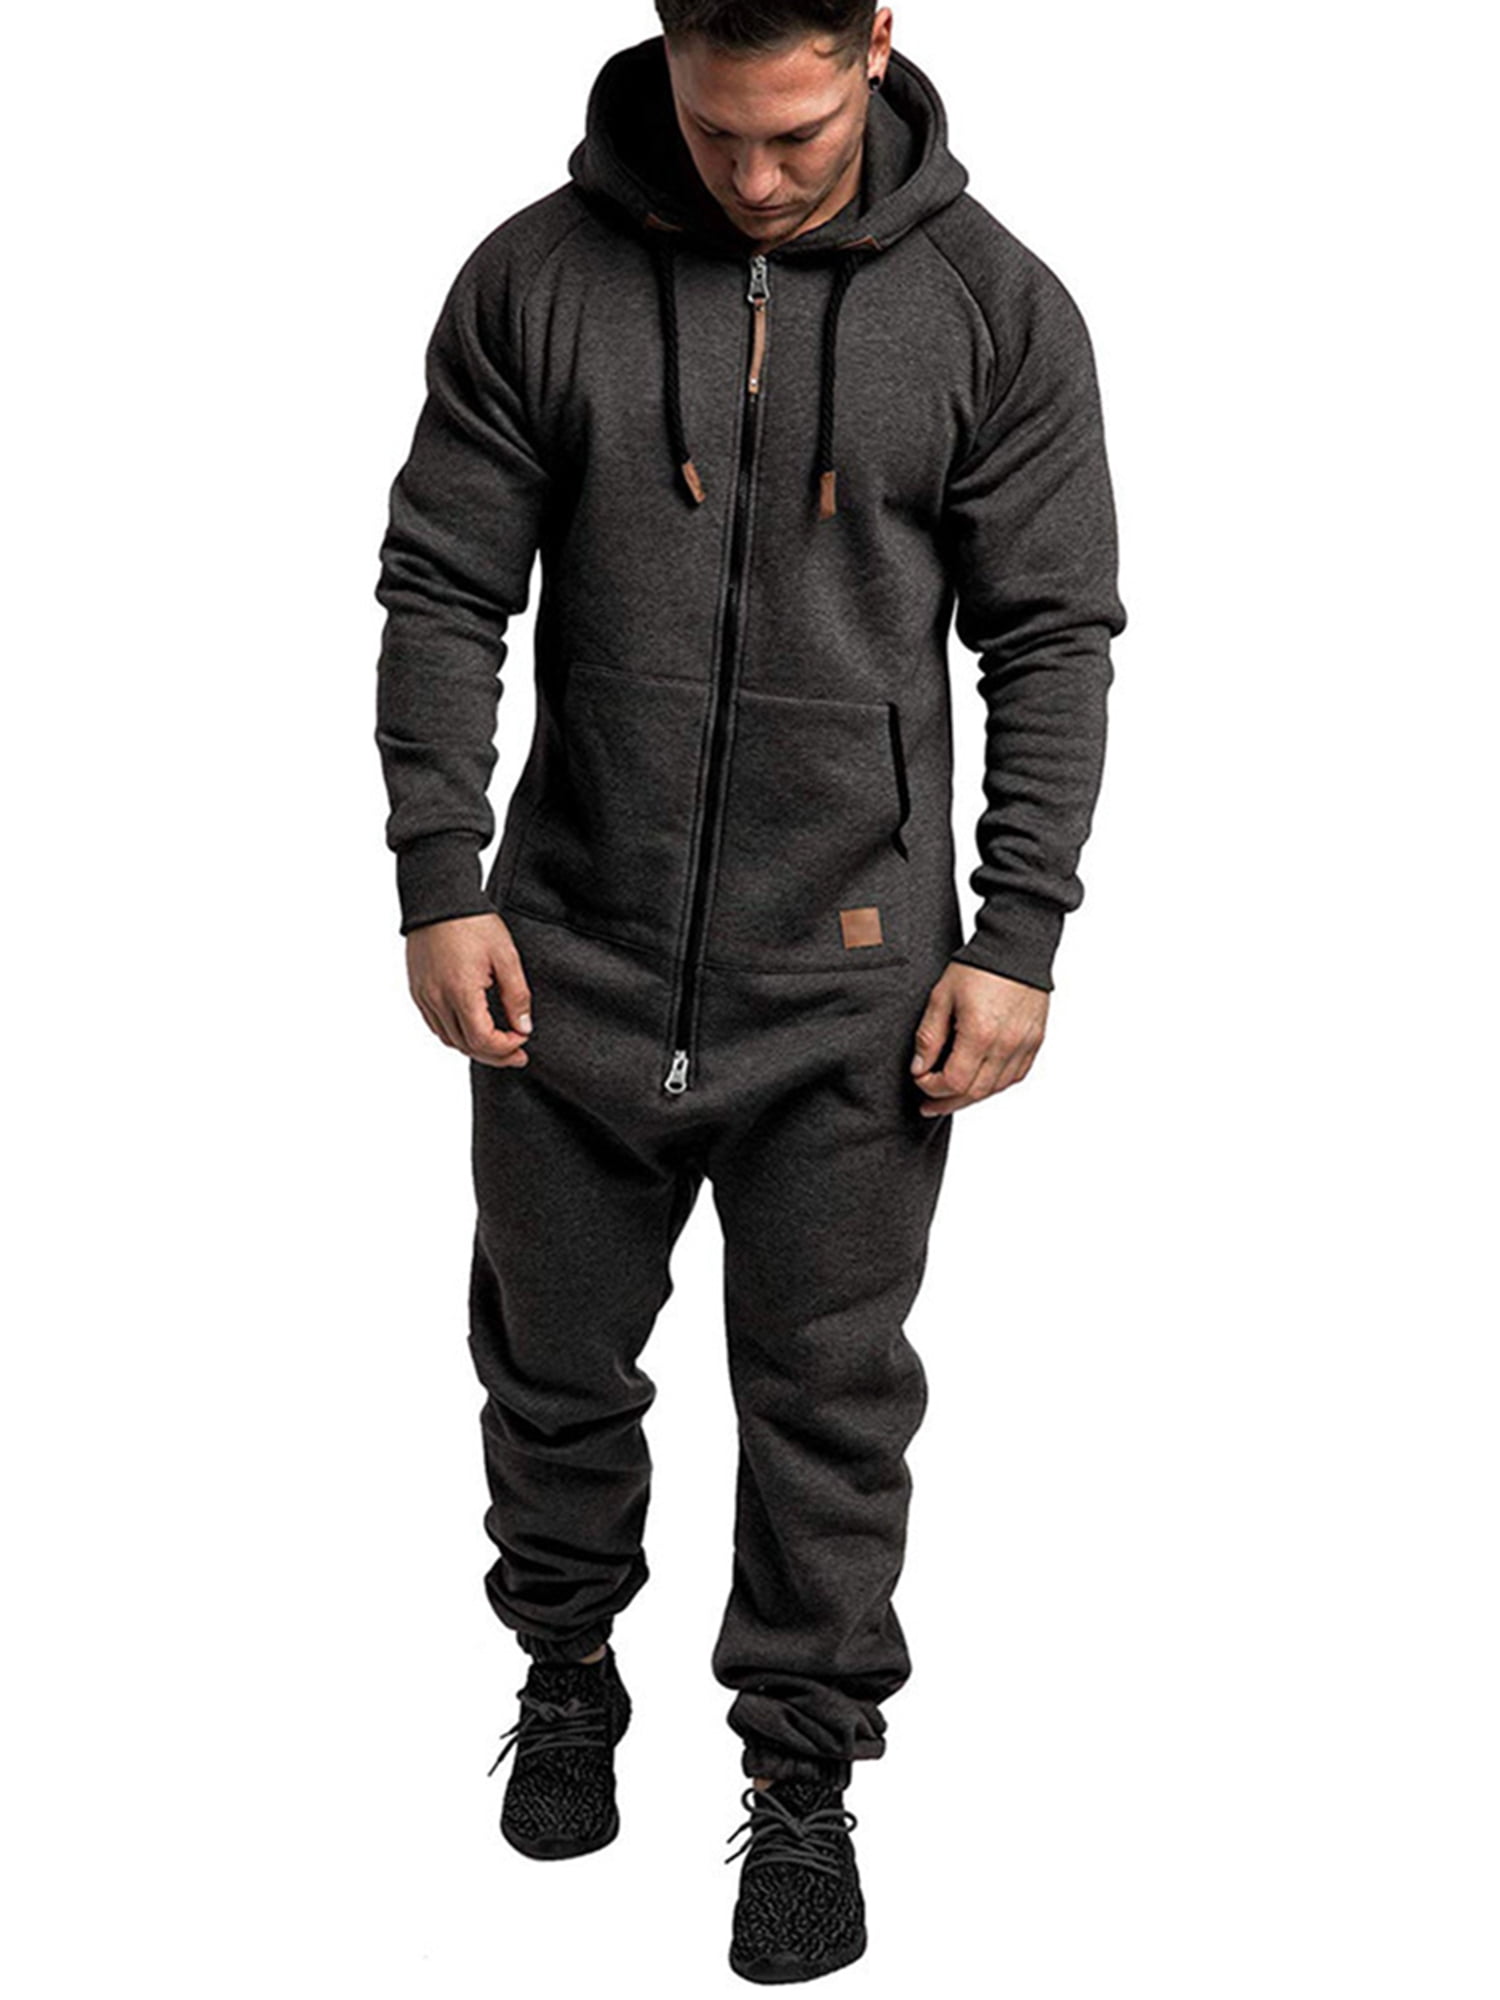 Sport Suit for Men Jogger Festive Romper Casual Clothing Shorts Tracksuit Onesie Hooded Jumpsuit Pajama Outfit Set Dungarees Zip Shorts